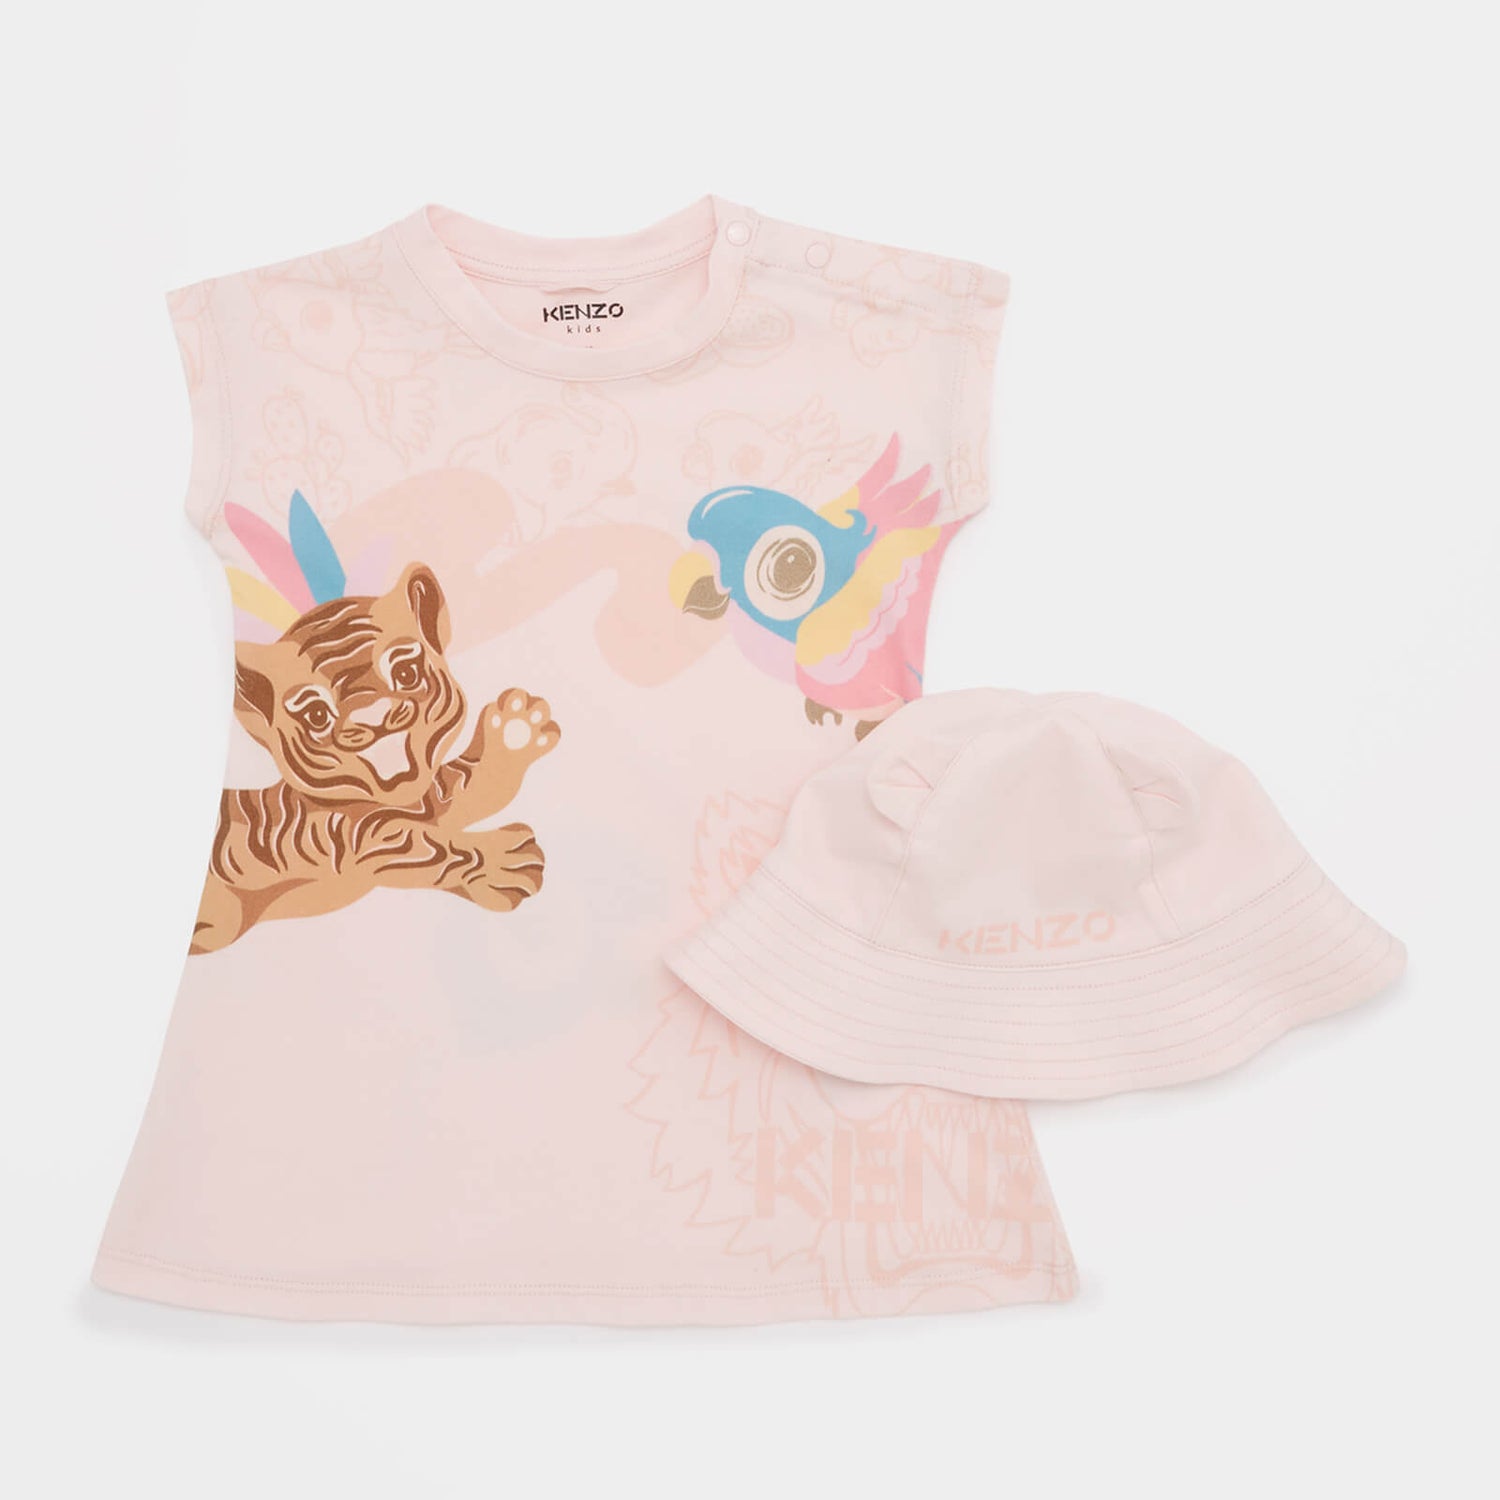 KENZO Babys' Dress and Hat Set - Pale Pink